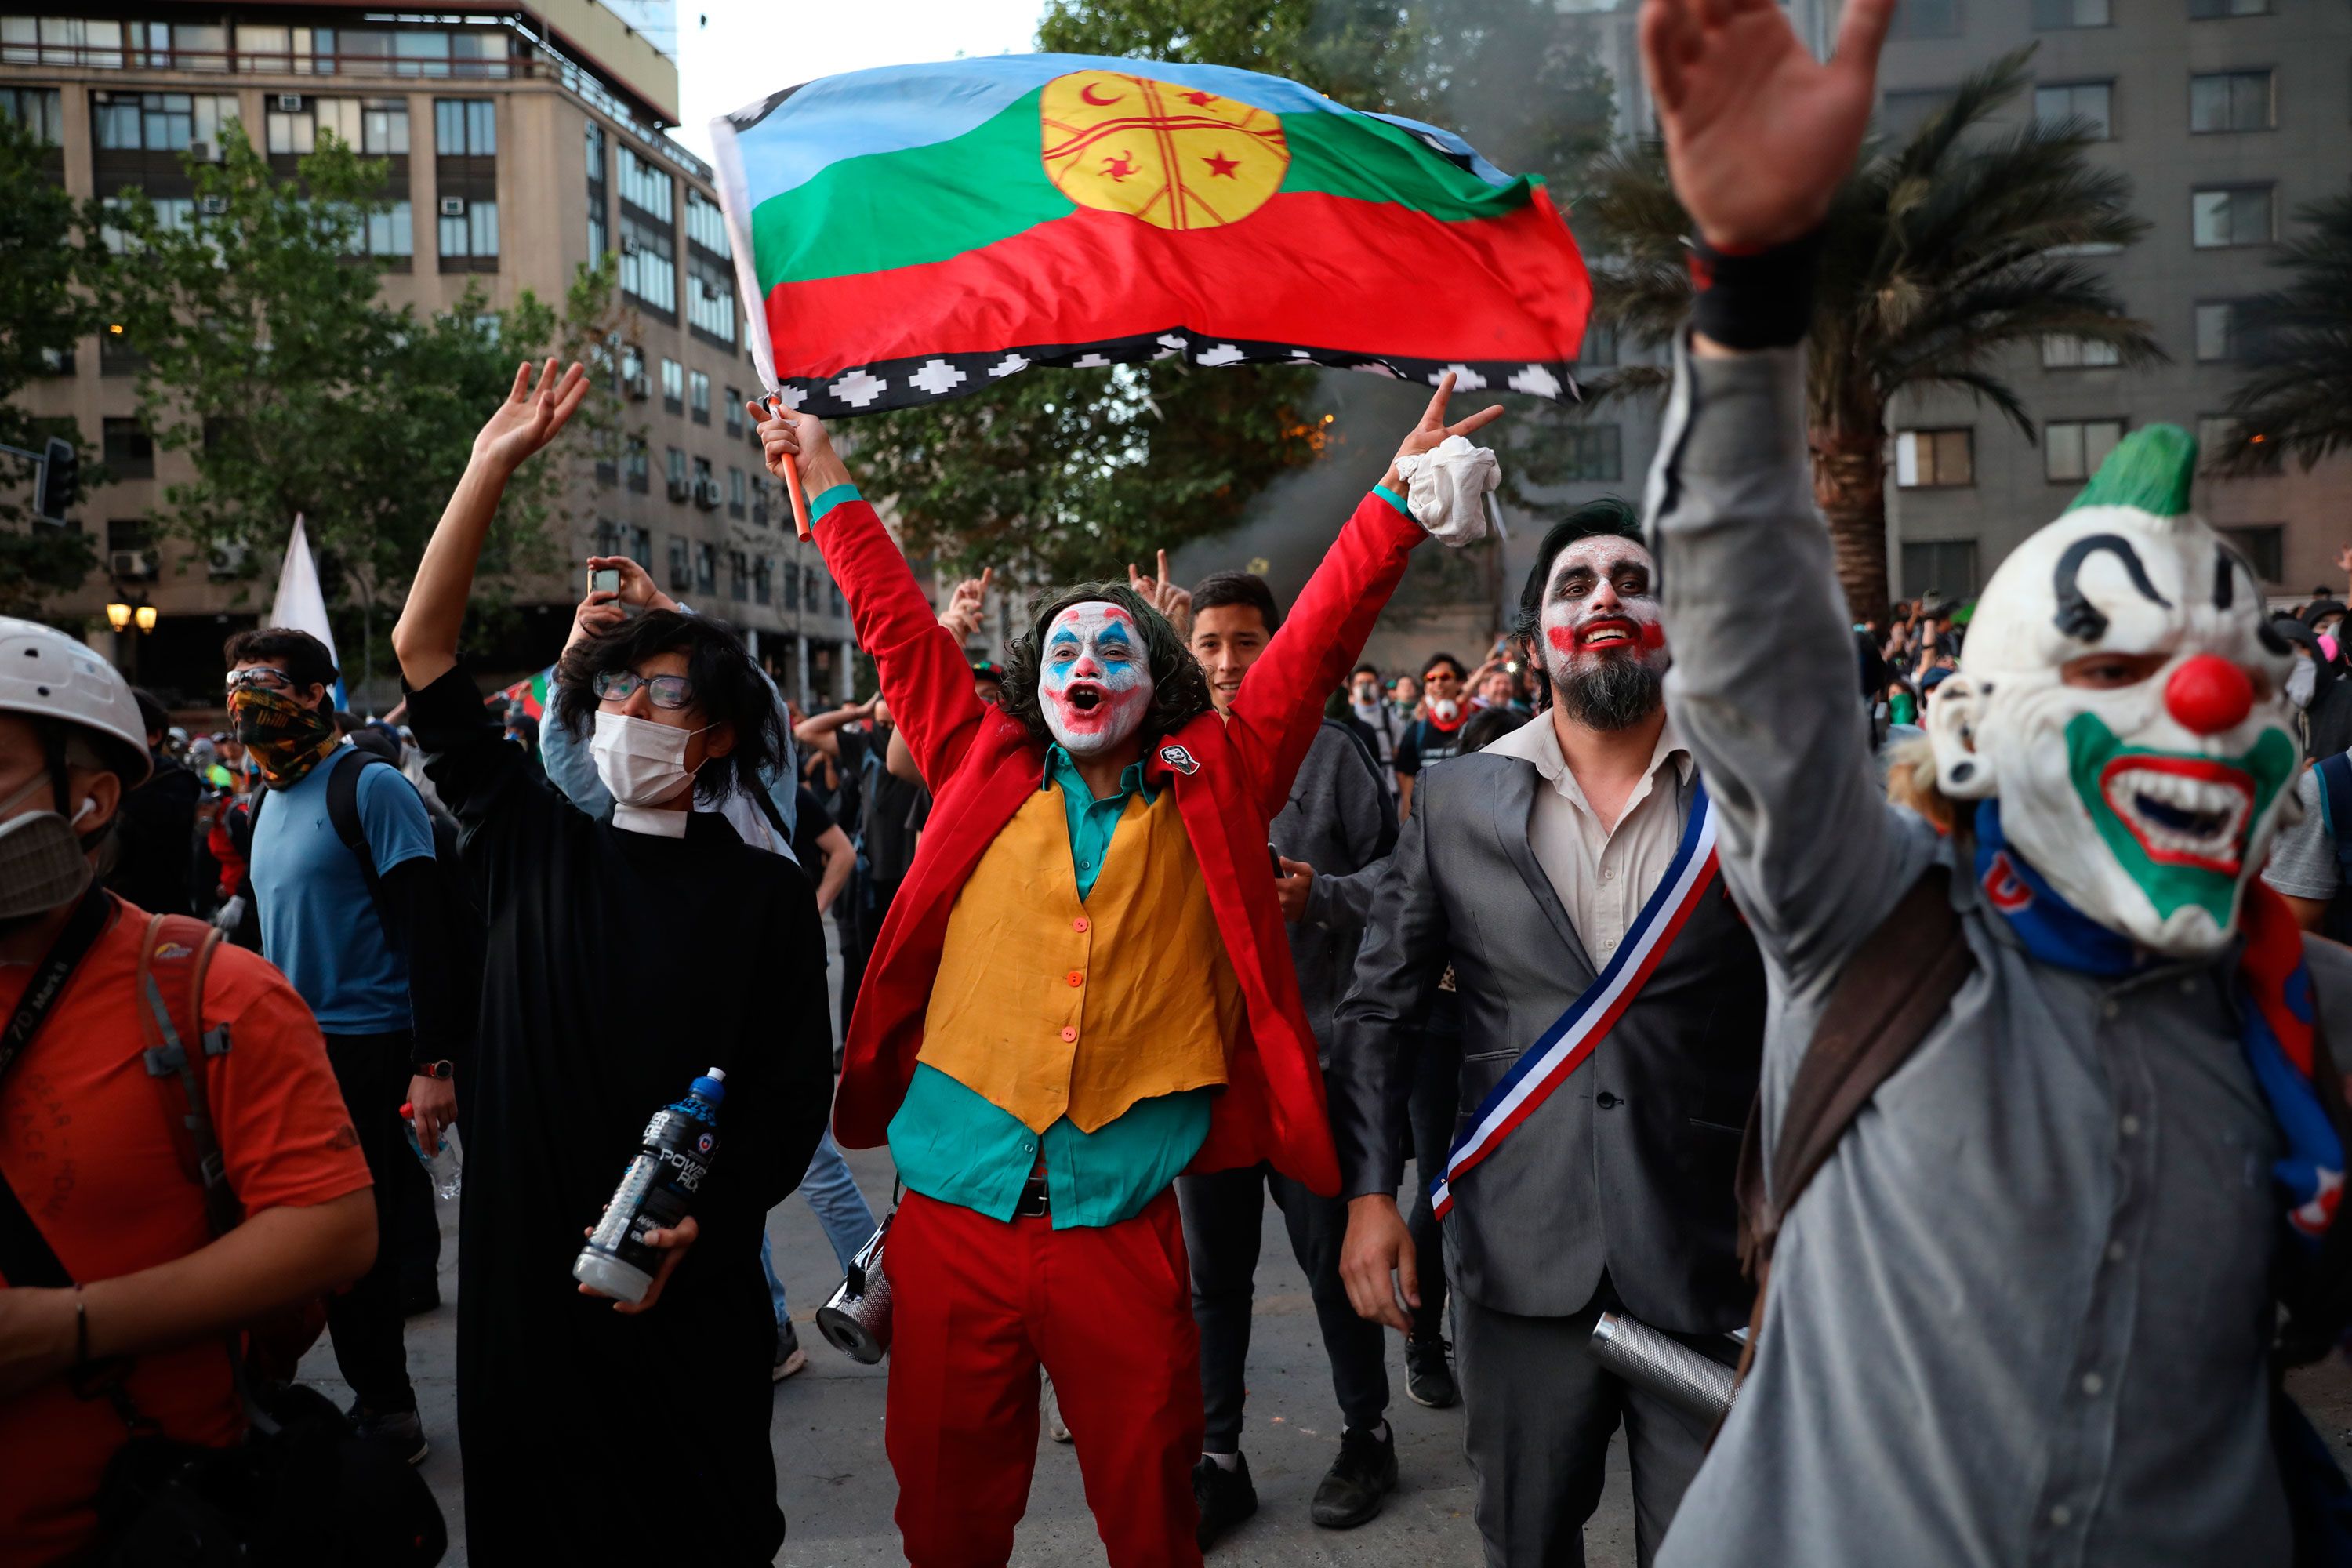 Why the Joker is showing up in protests around the world